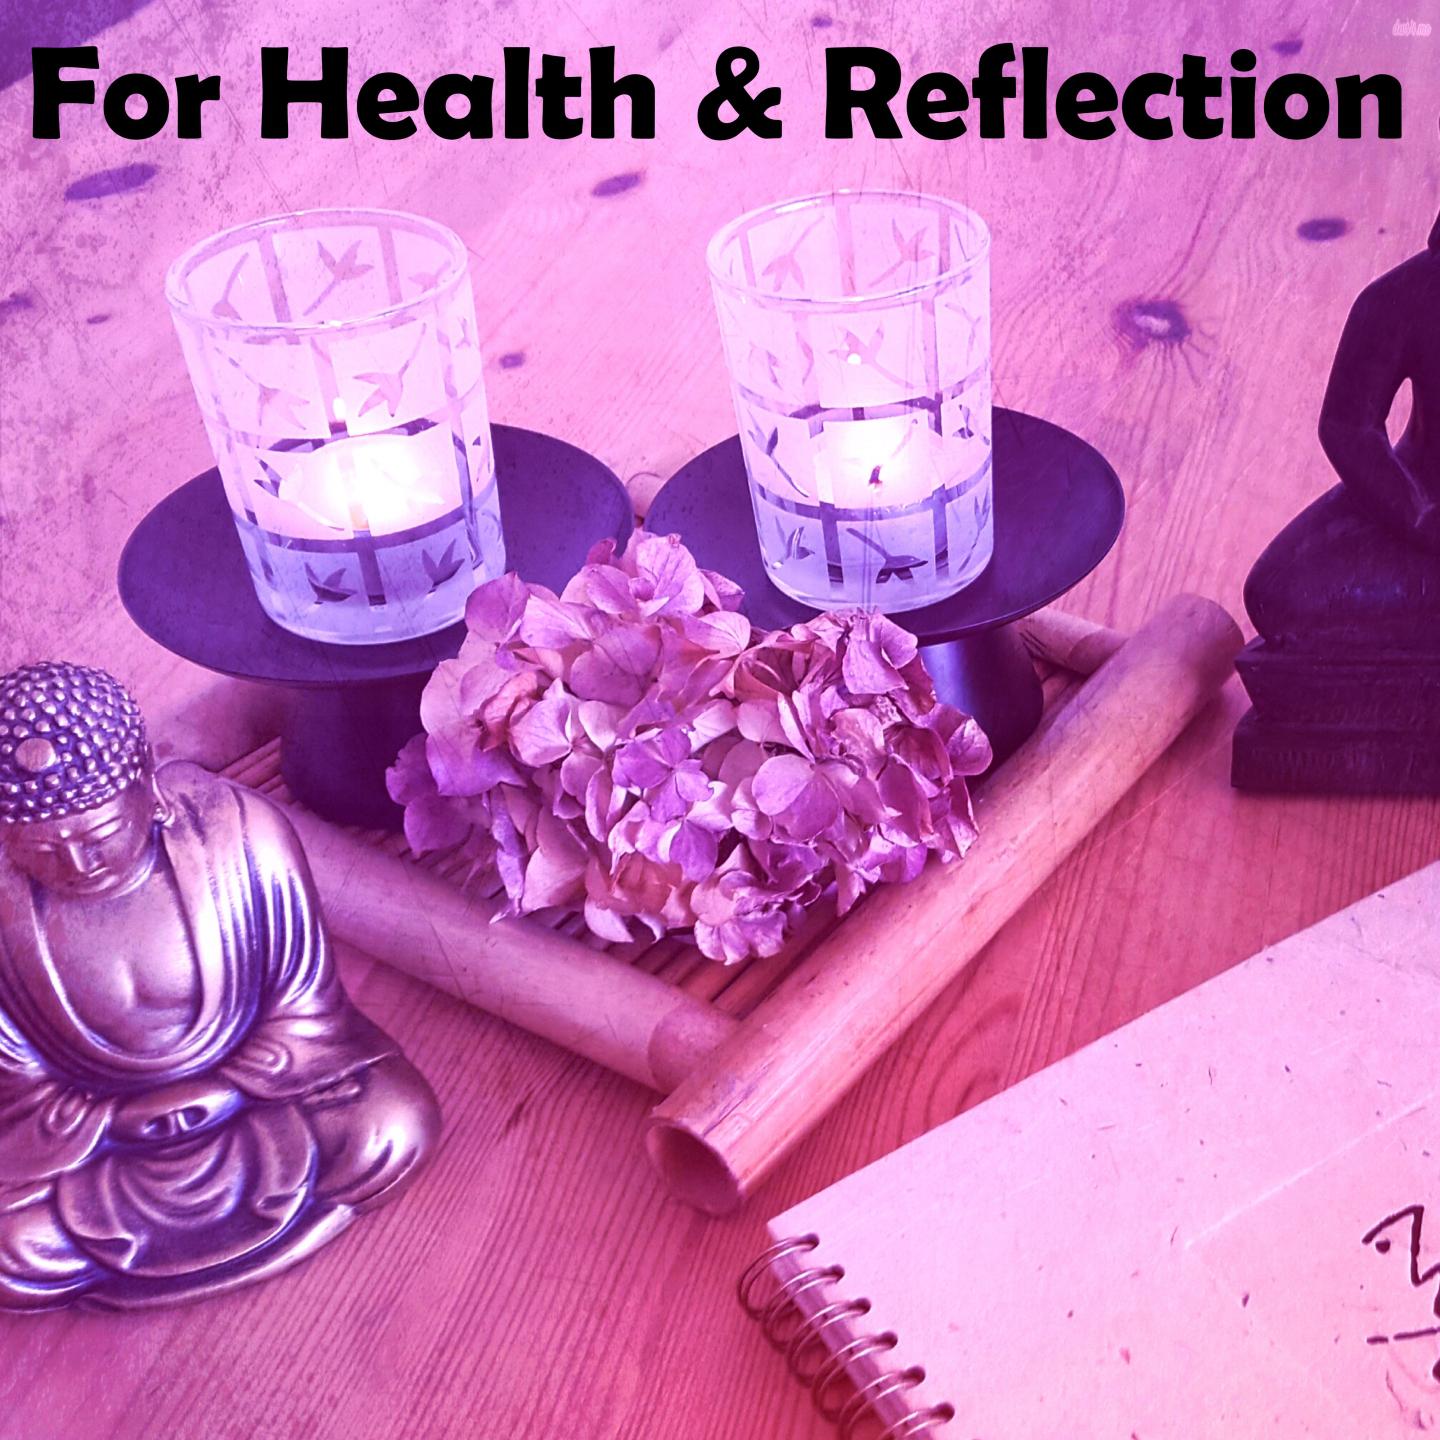 For Health & Reflection